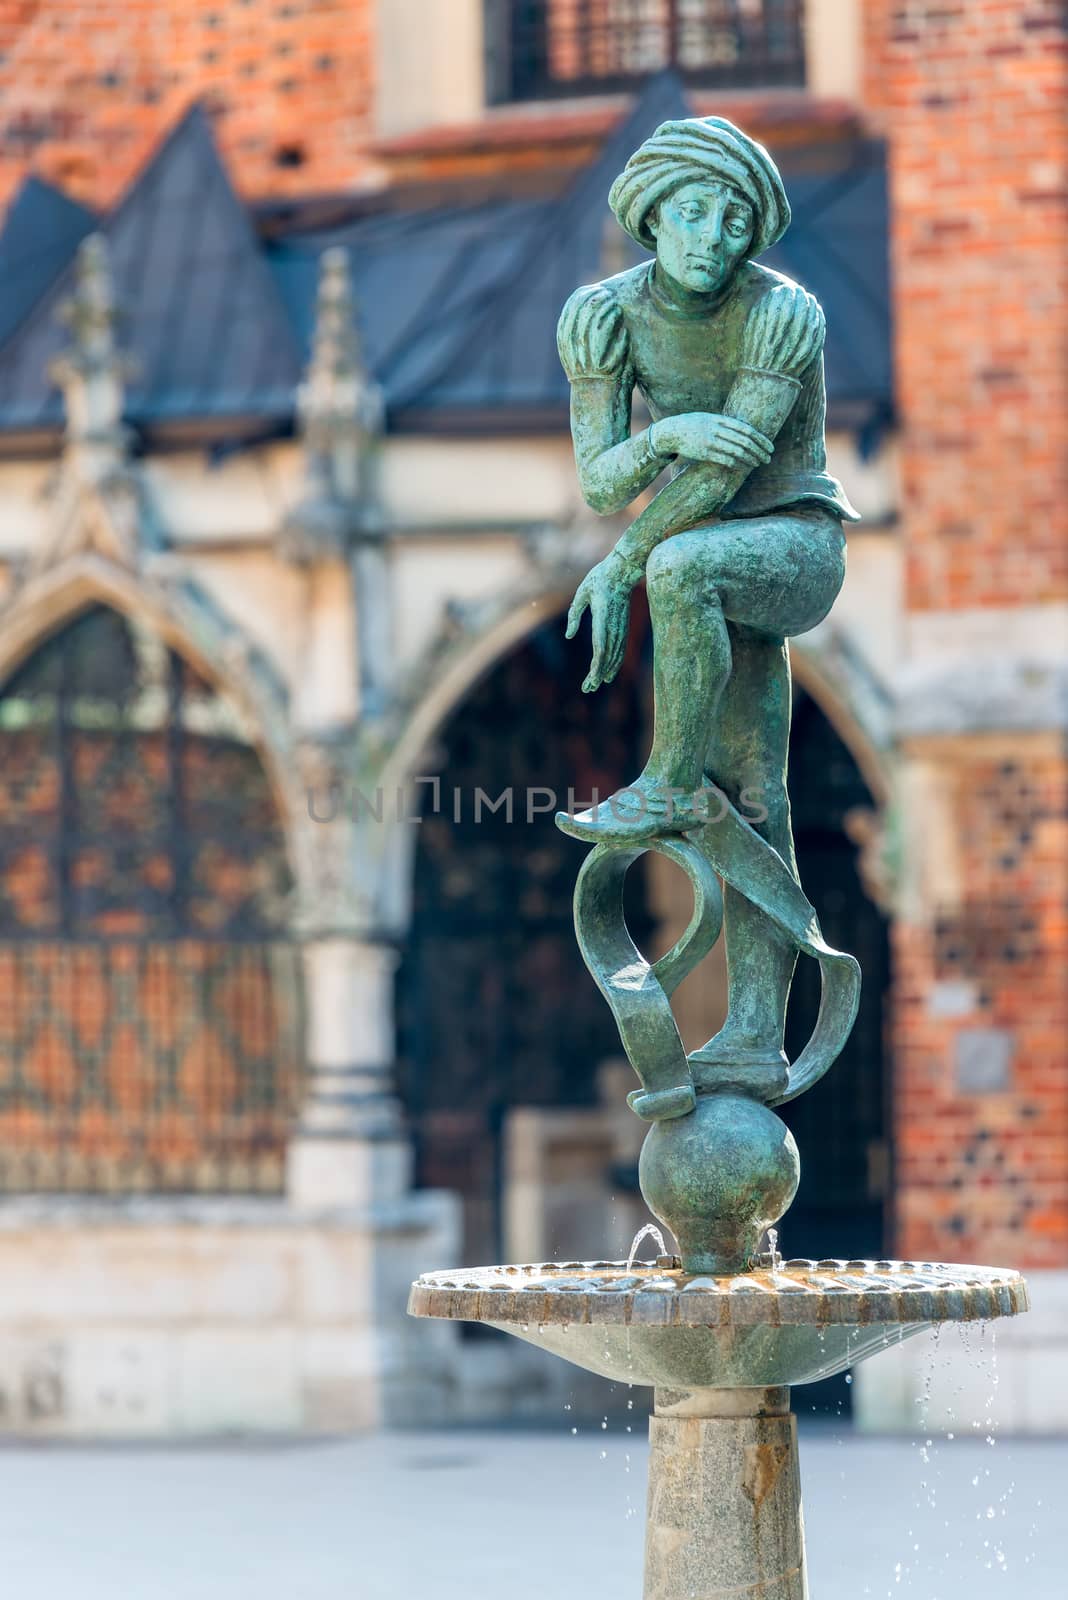 Sculpture Jacques poor student fountain in the center of Krakow, Poland